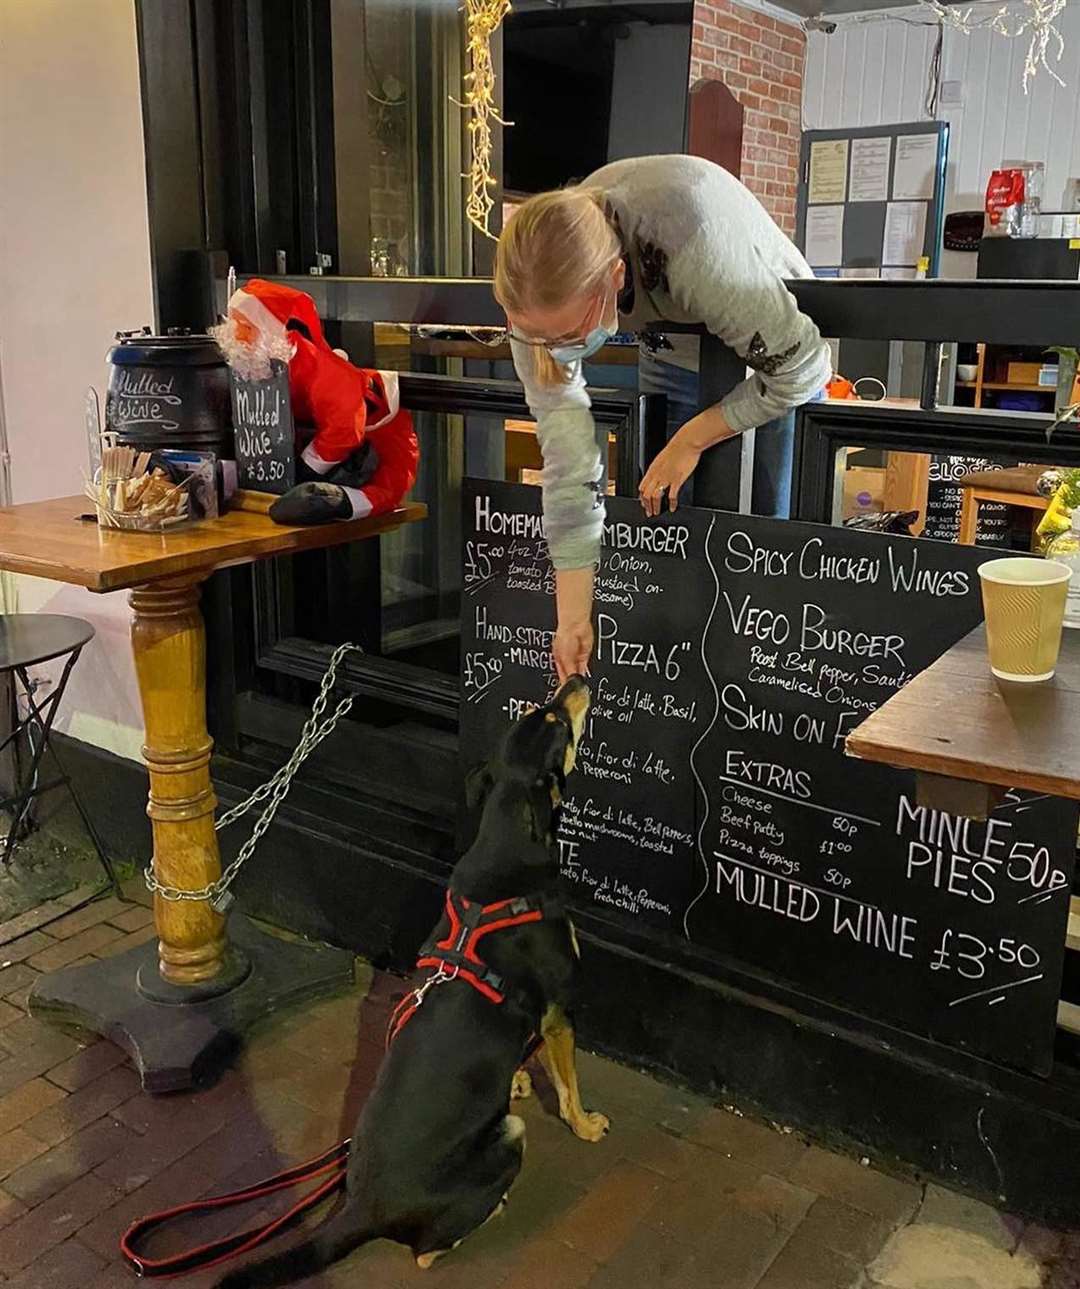 The Bedford is running a window service for takeout meals. Humans are just as welcome as dogs. Picture: The Bedford on Facebook